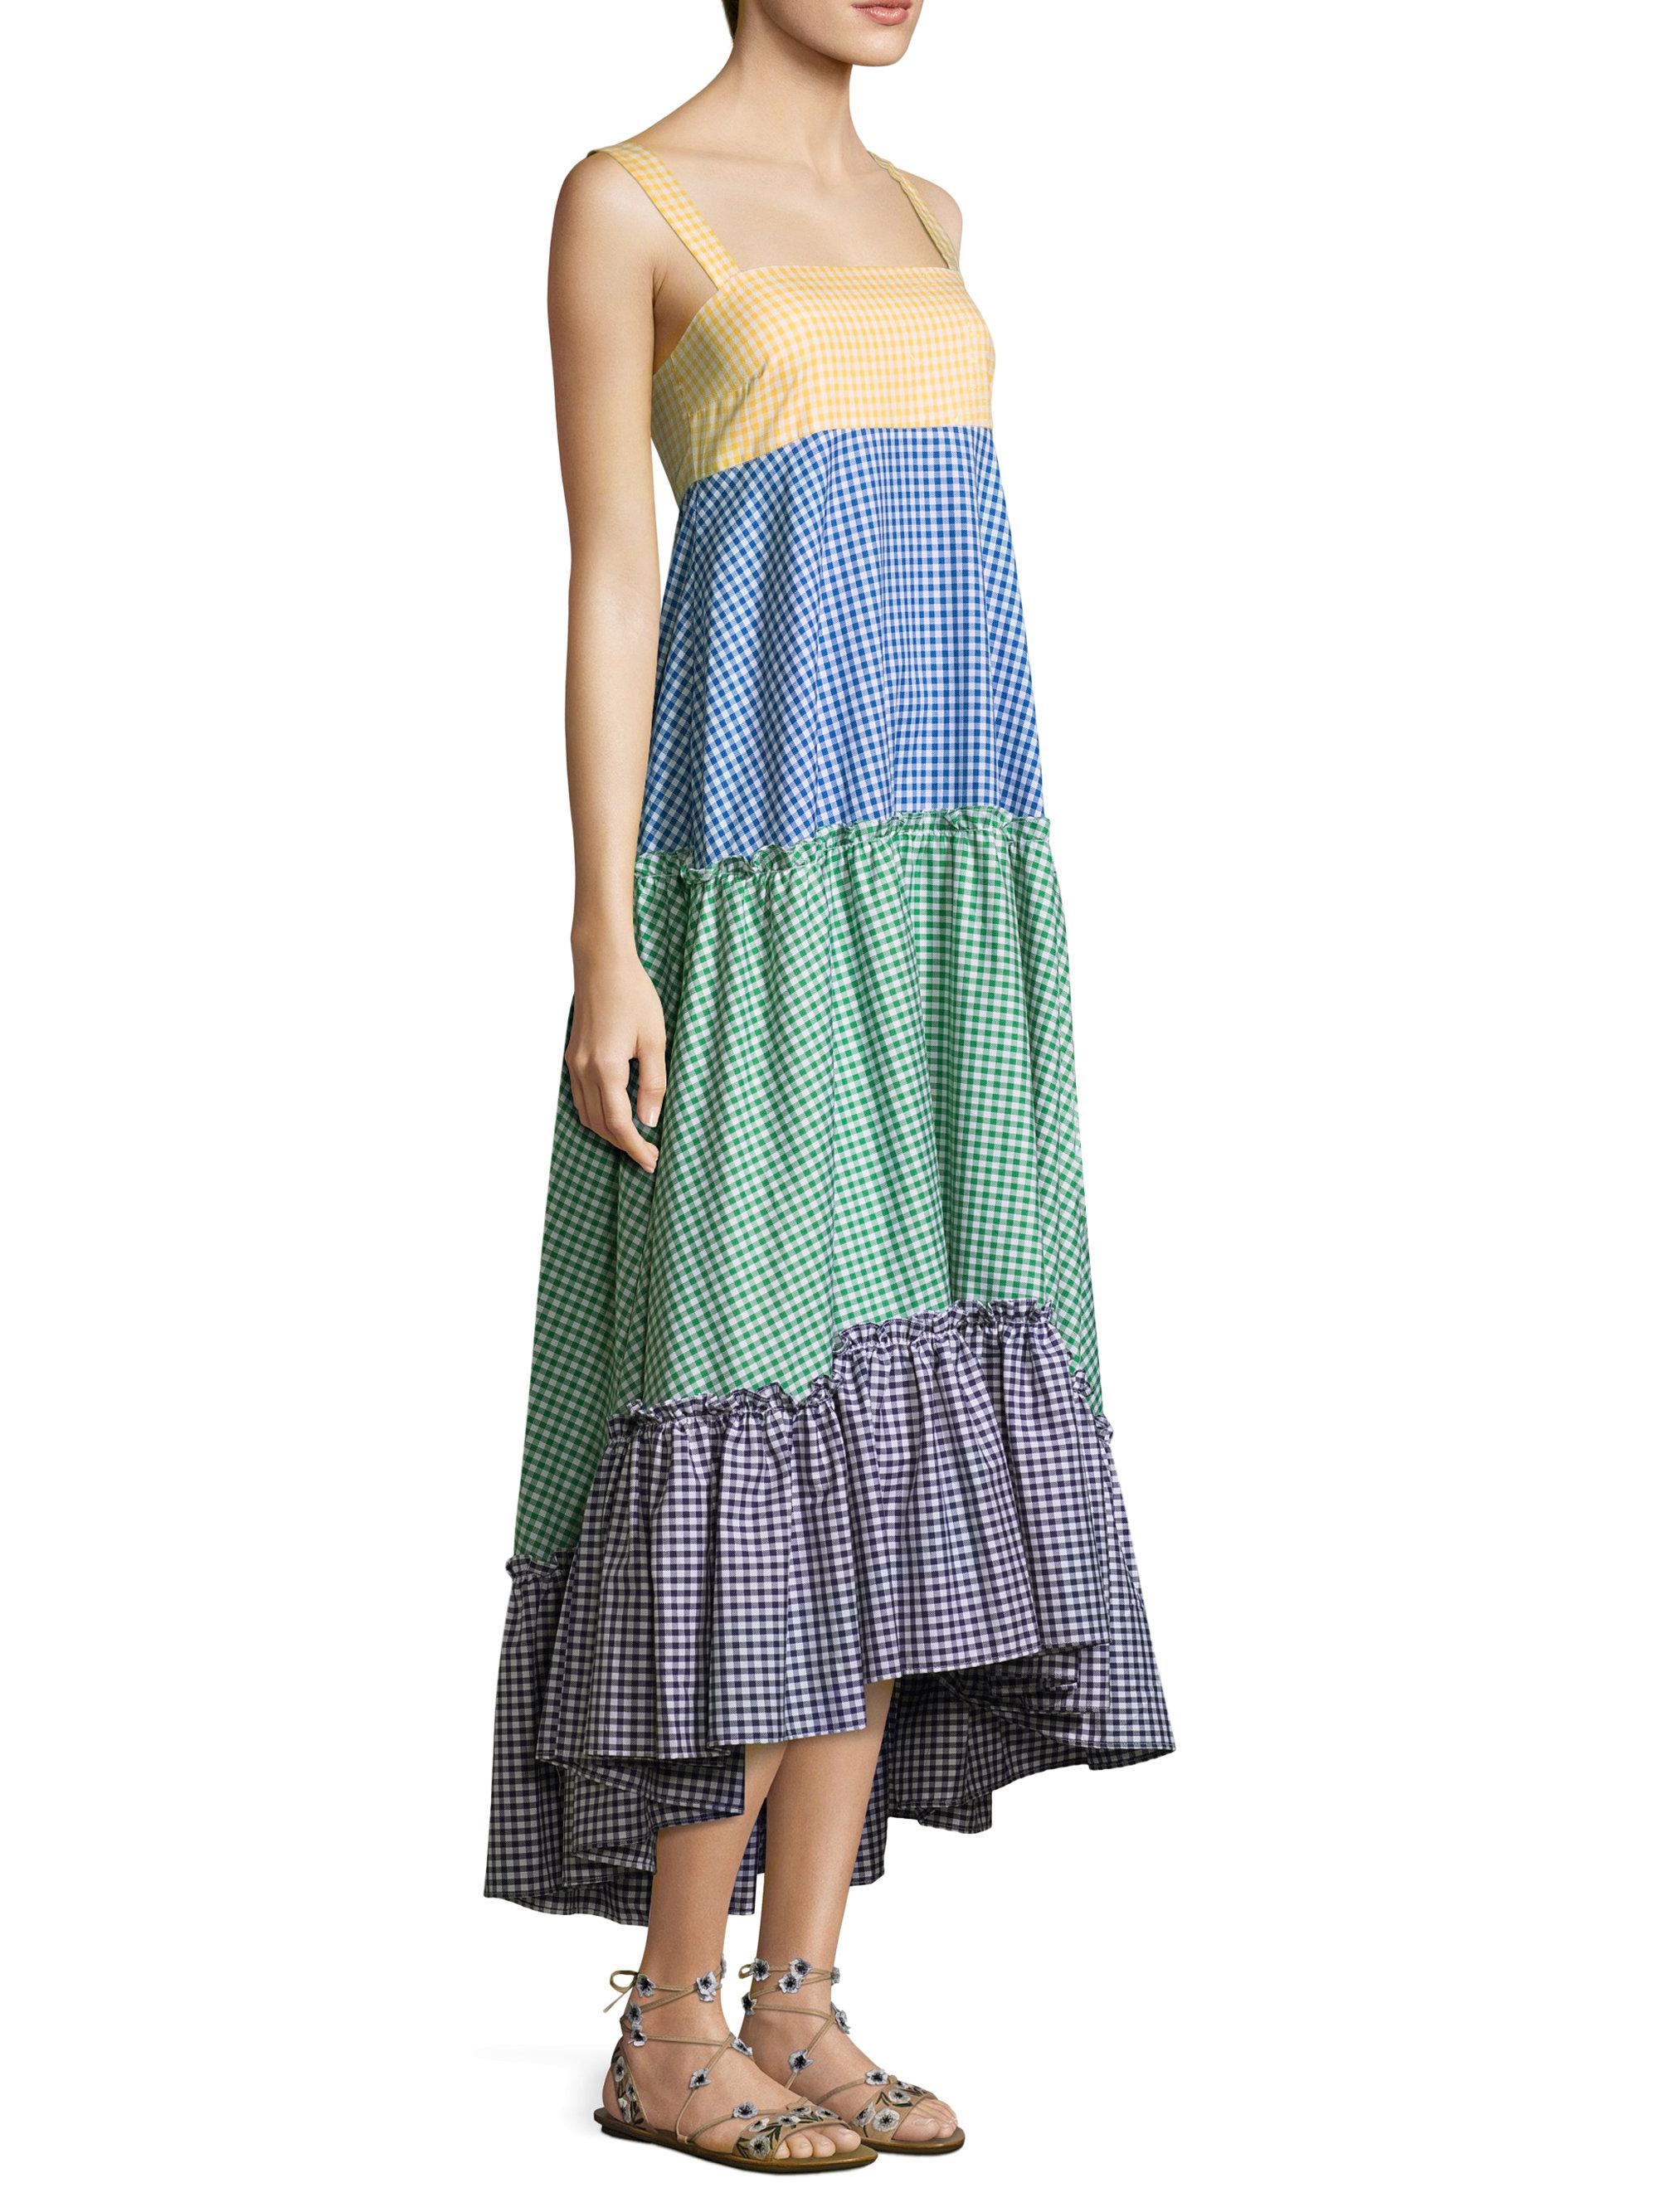 Lyst - Mds Stripes Tiered Gingham Plaid Dress in Blue